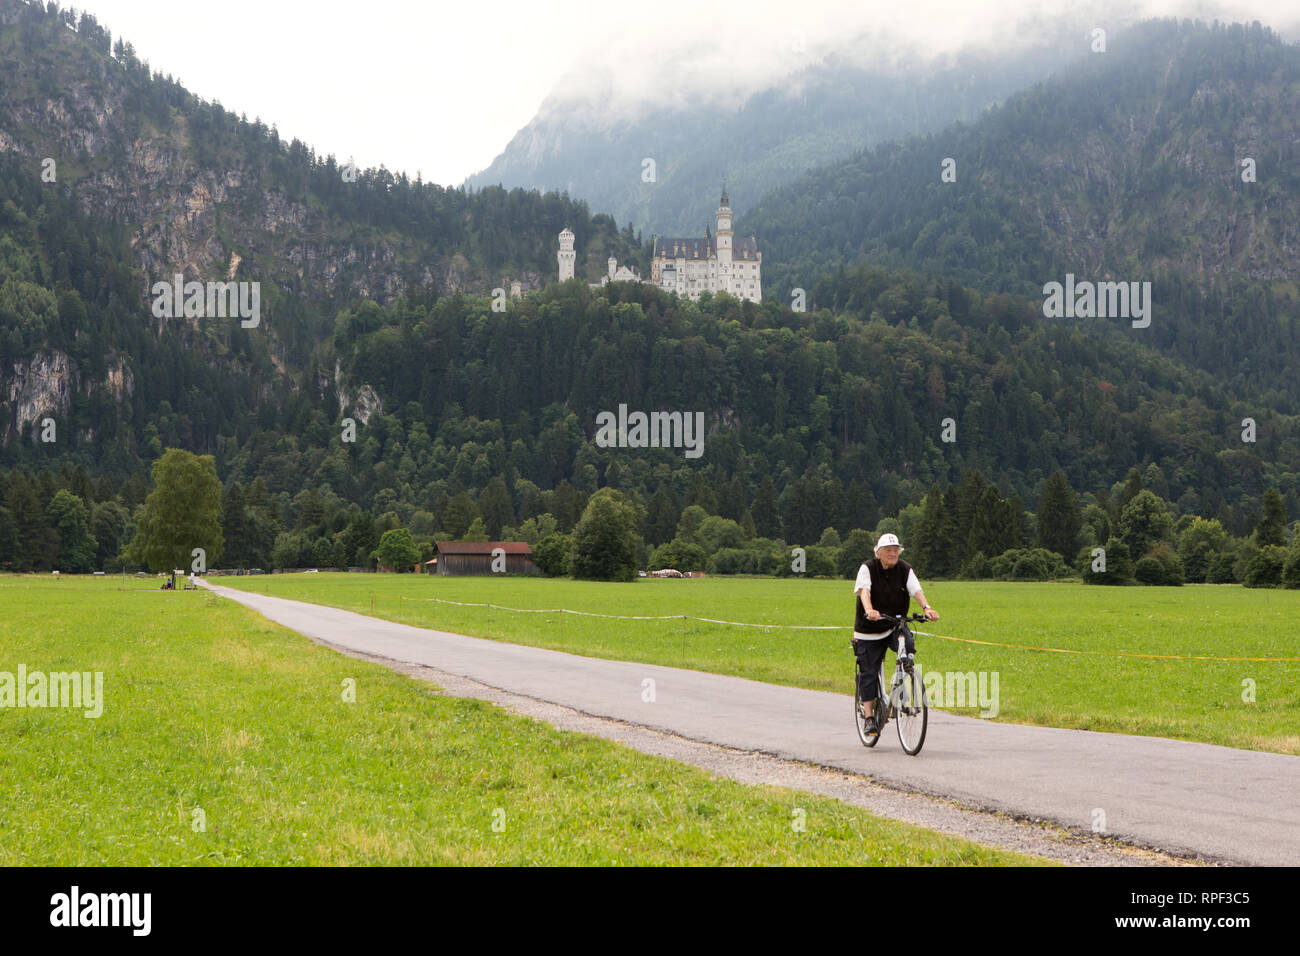 SCHWANGAU - Cyclist with the famous Neuschwanstein castle in the background. Stock Photo